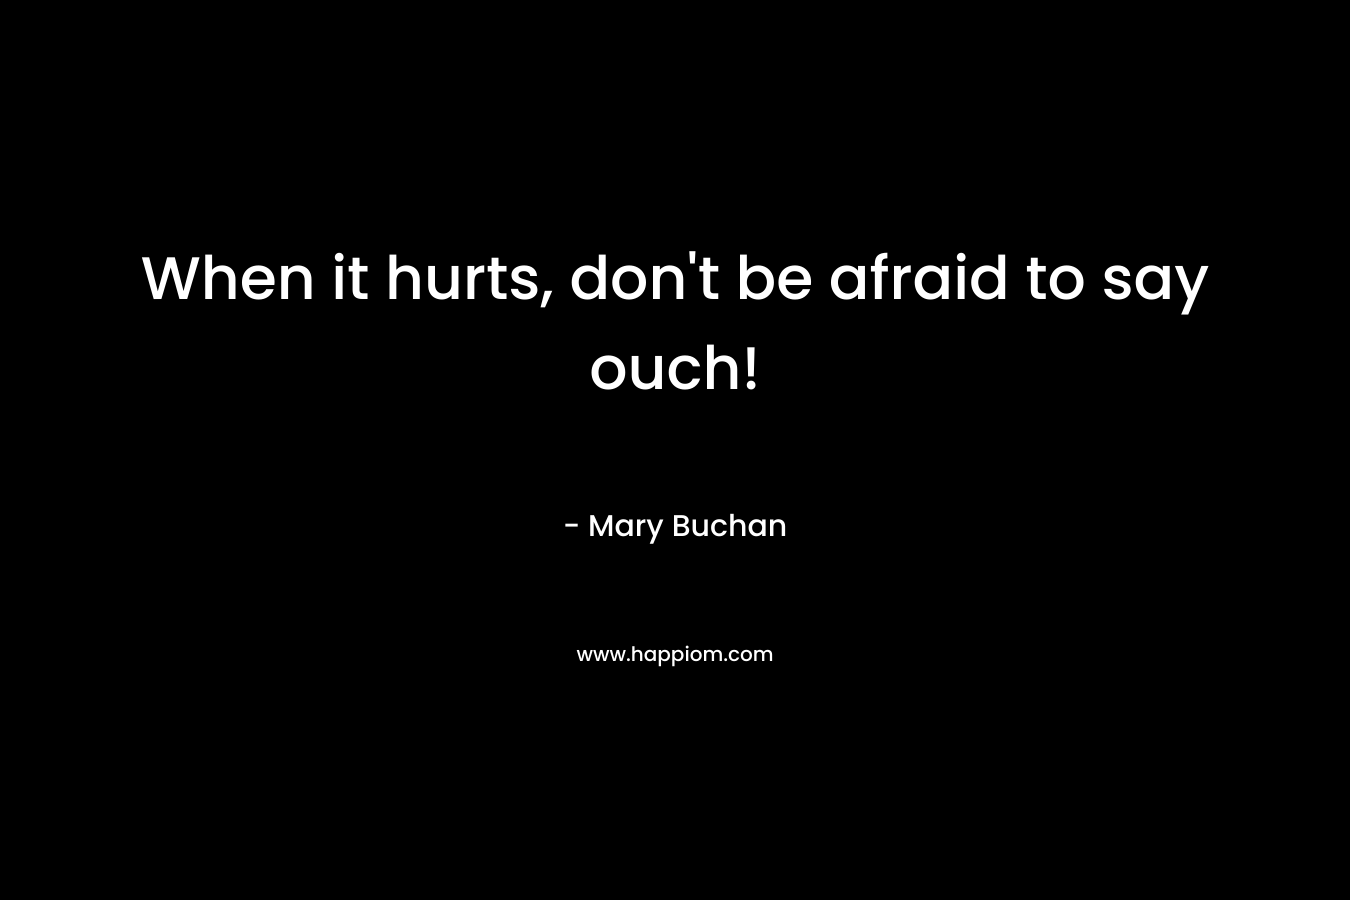 When it hurts, don't be afraid to say ouch!